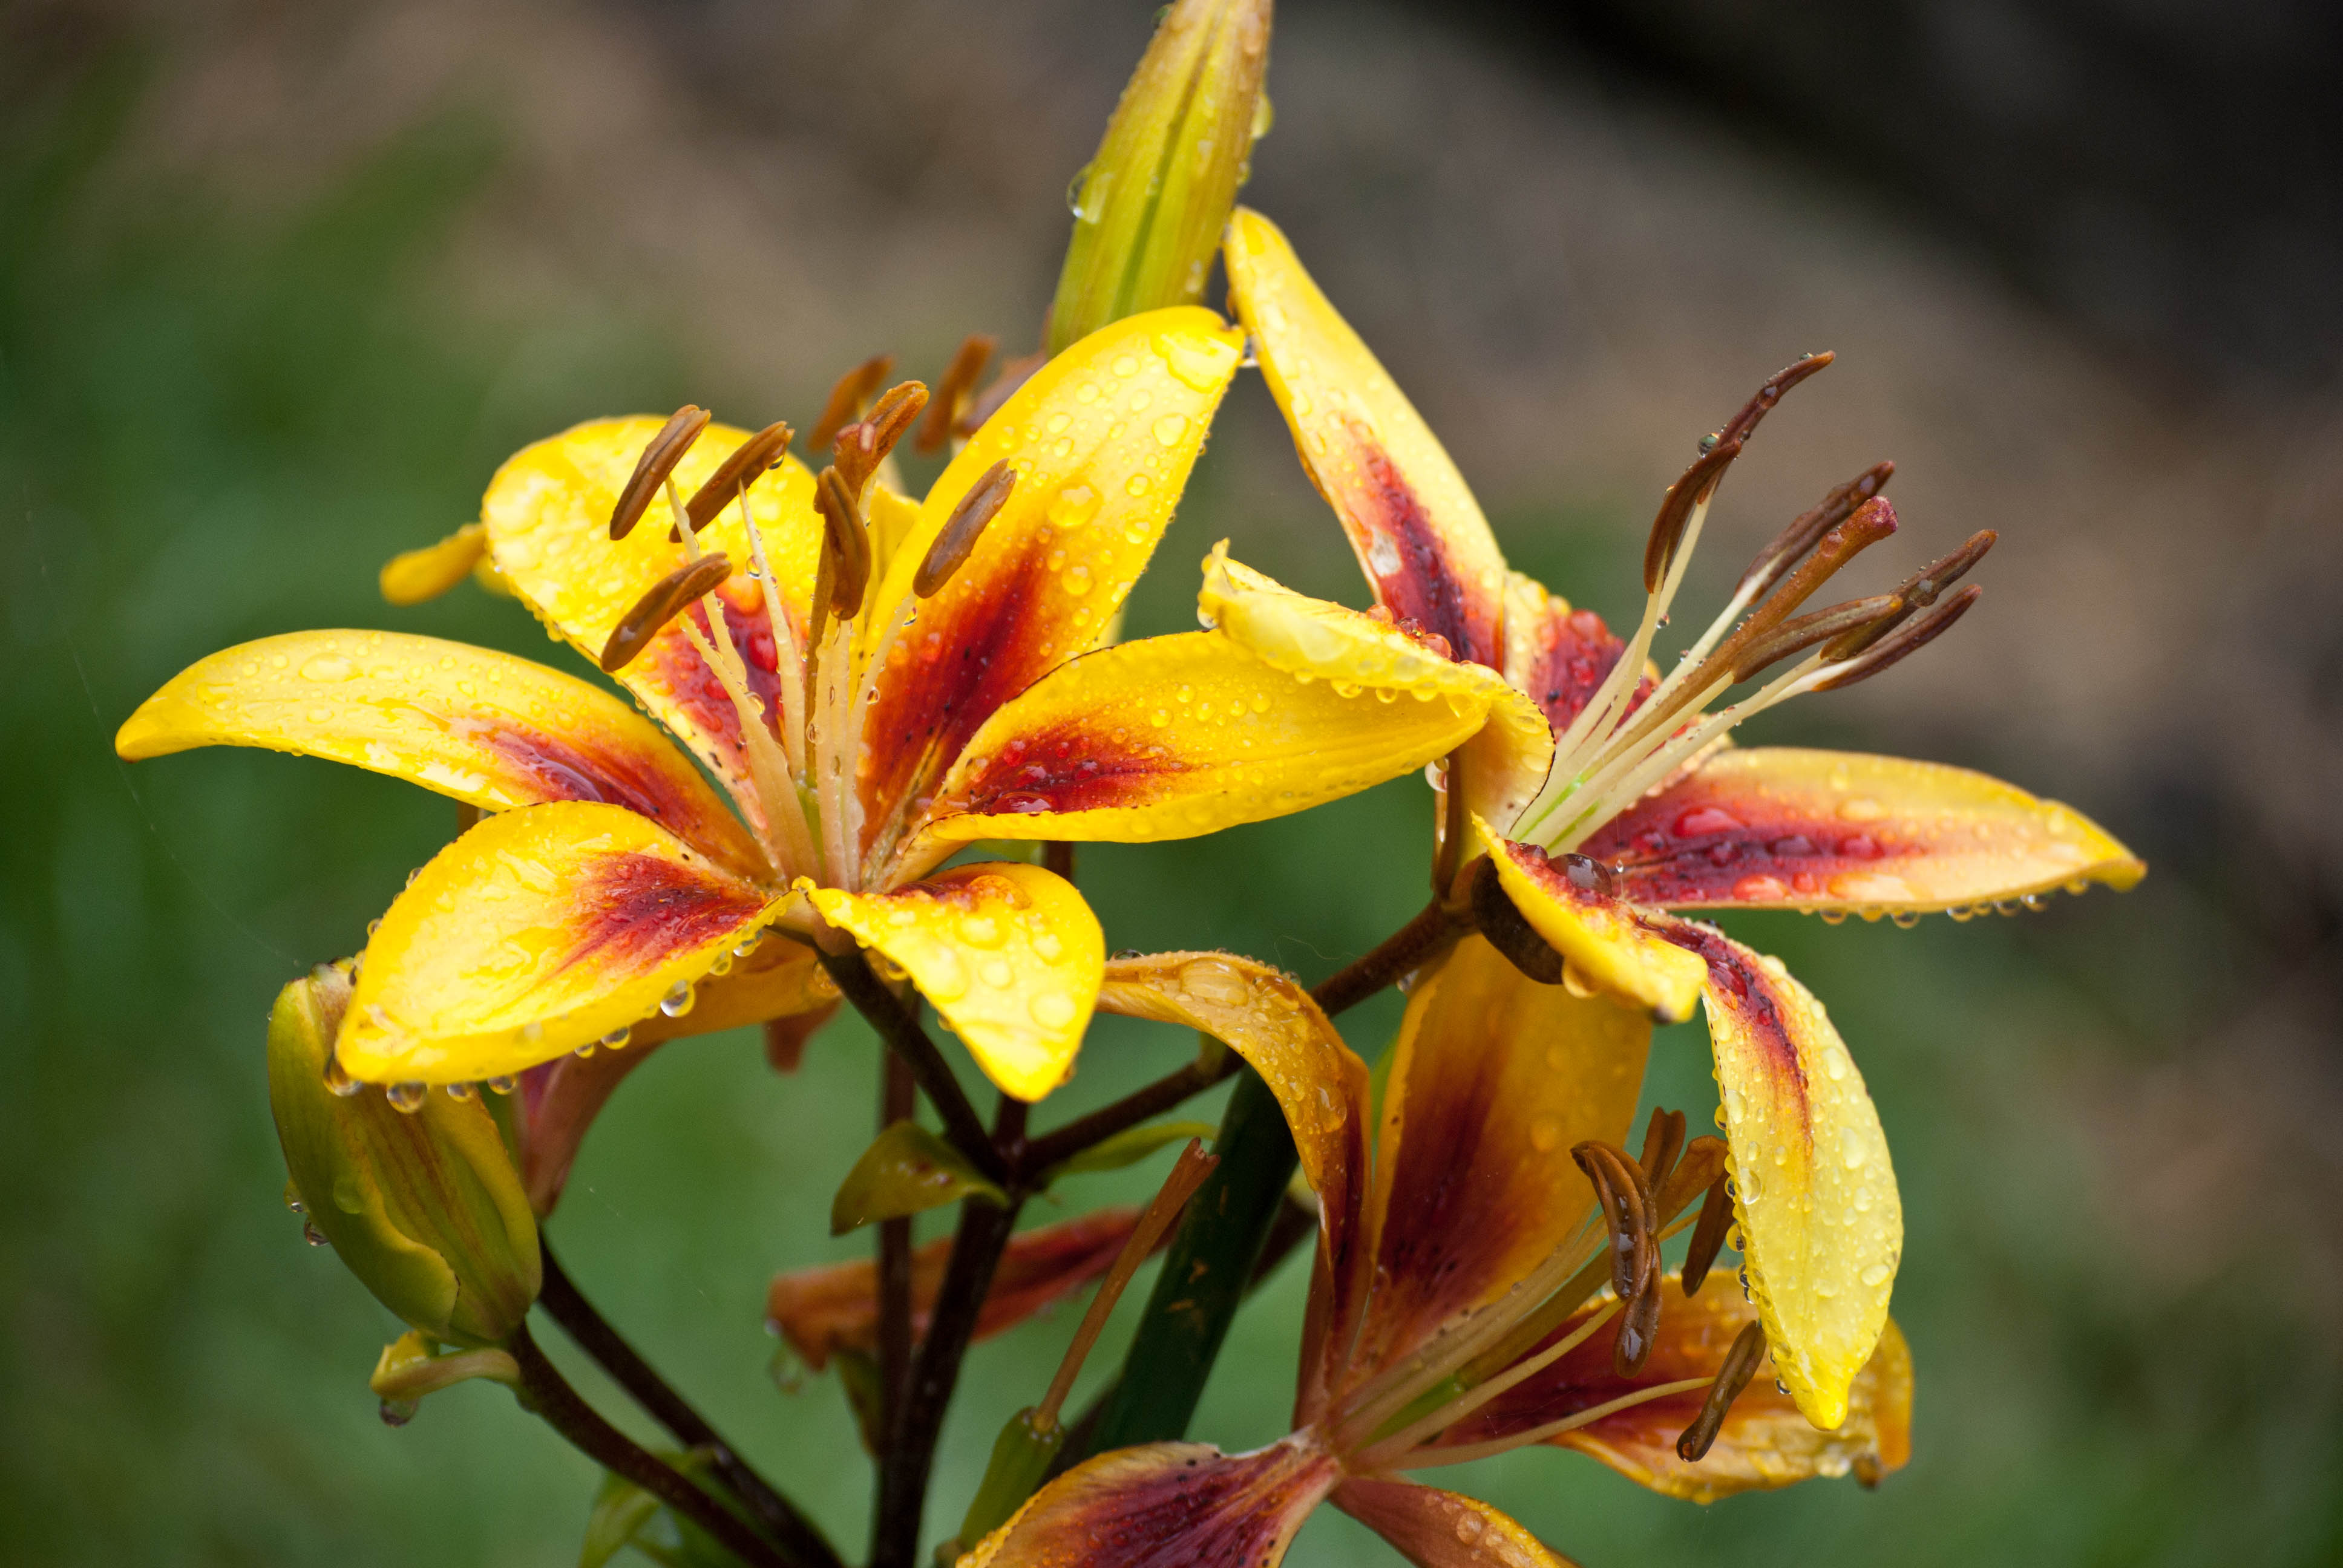 File:Raindrops on Yellow Lilly.jpg - Wikimedia Commons